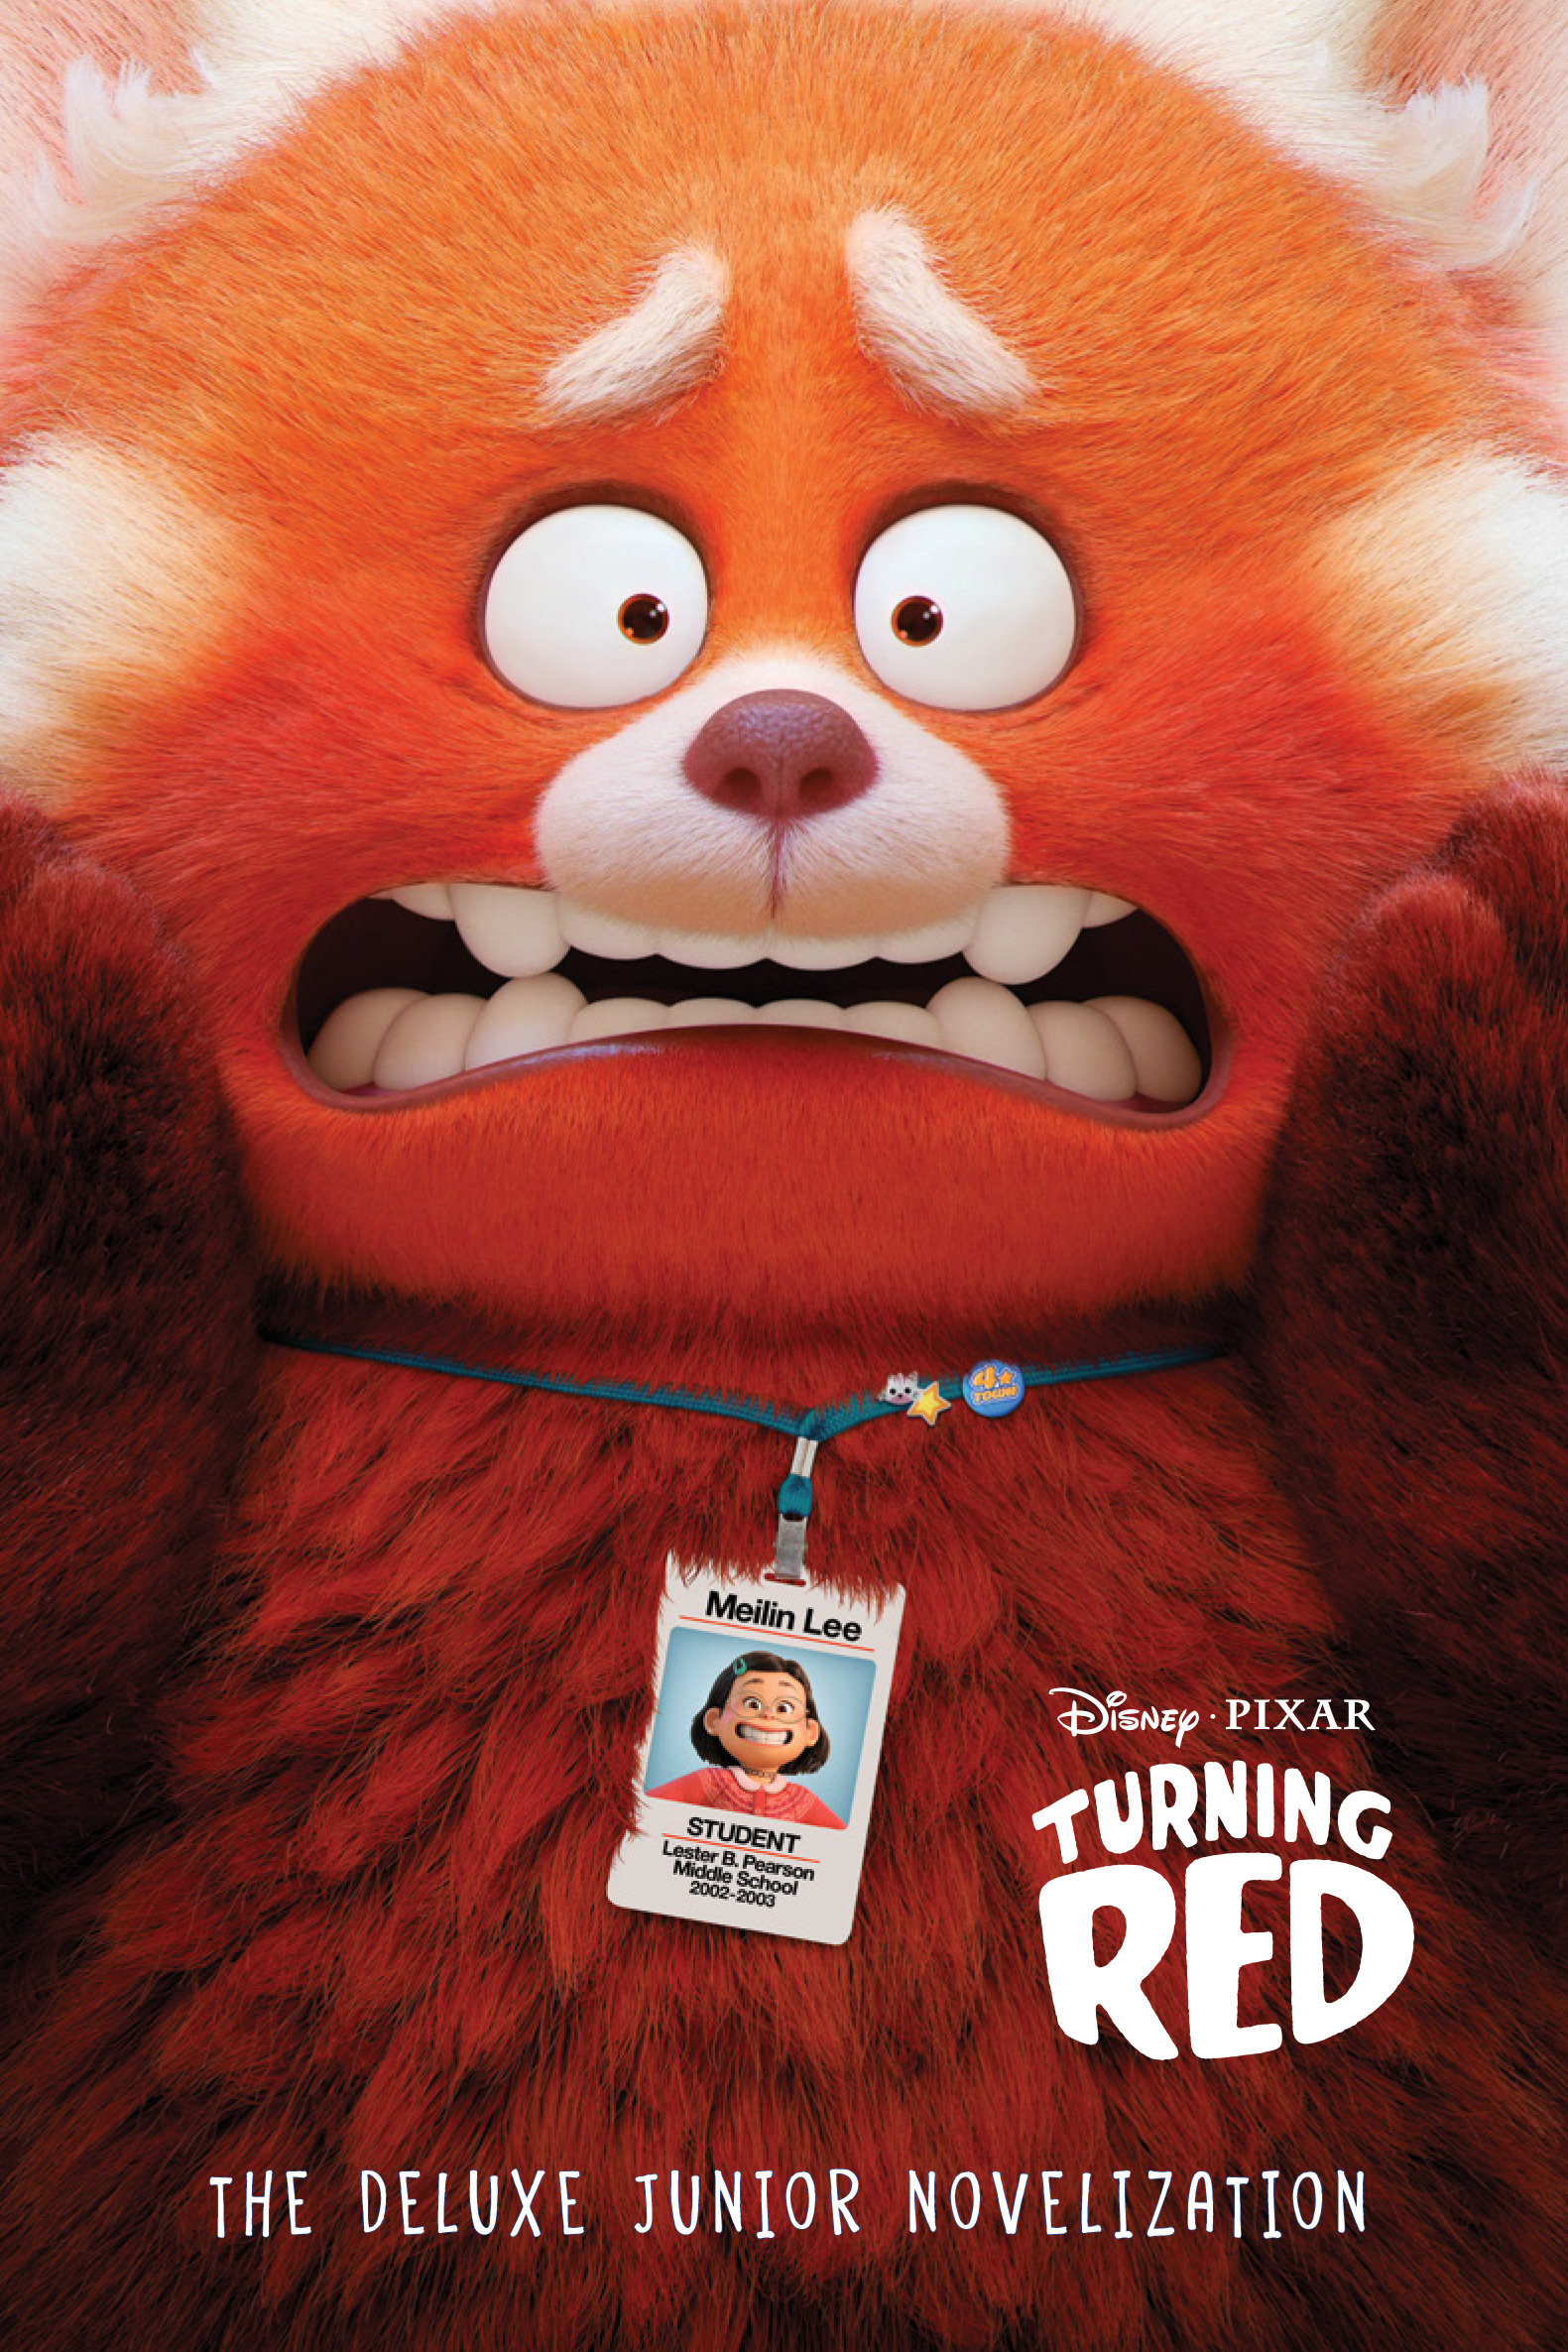 Disney/Pixar Turning Red: The Deluxe Junior Novelization | 6-8 years old